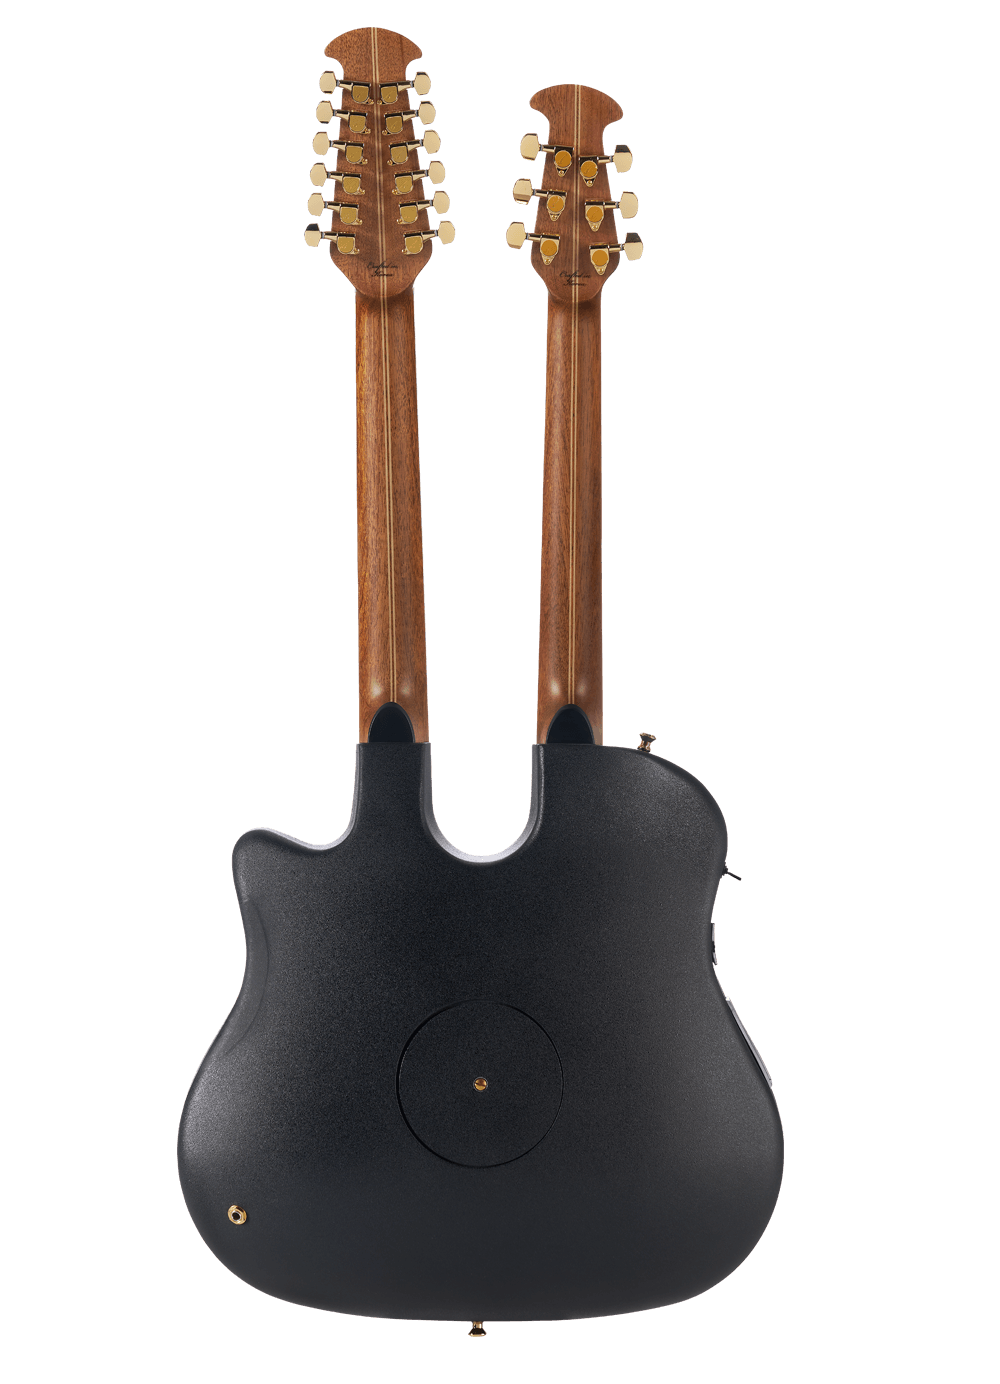 Guitar Acoustic Company Acoustic-Electric Ovation Free Transparent Image HQ Clipart